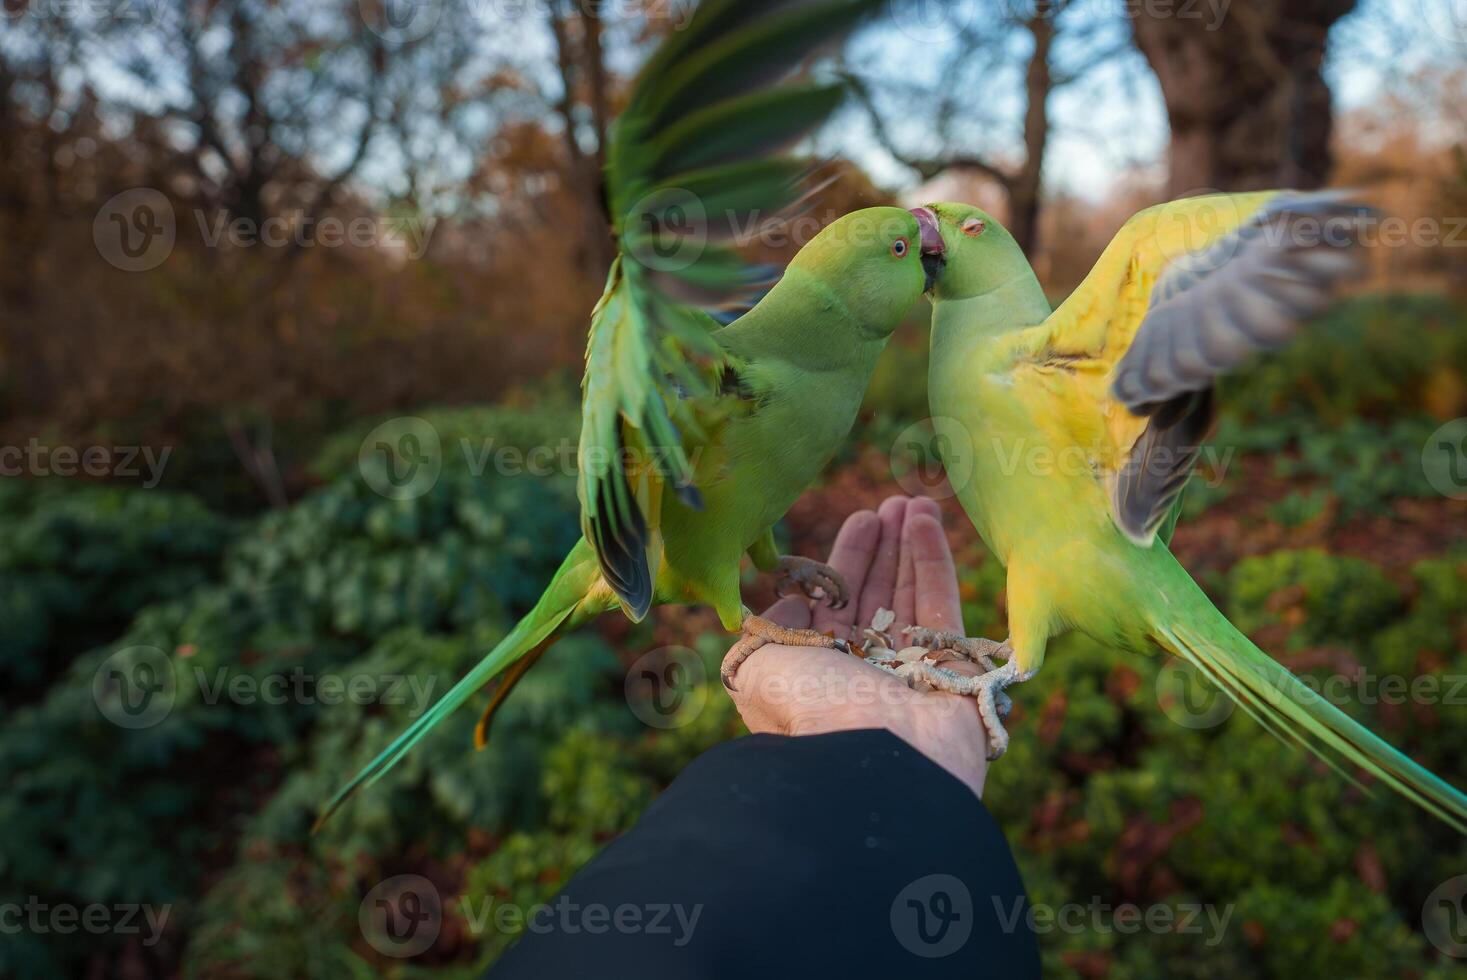 Individual Giving Food to Green Parakeets in a London Park at Twilight photo